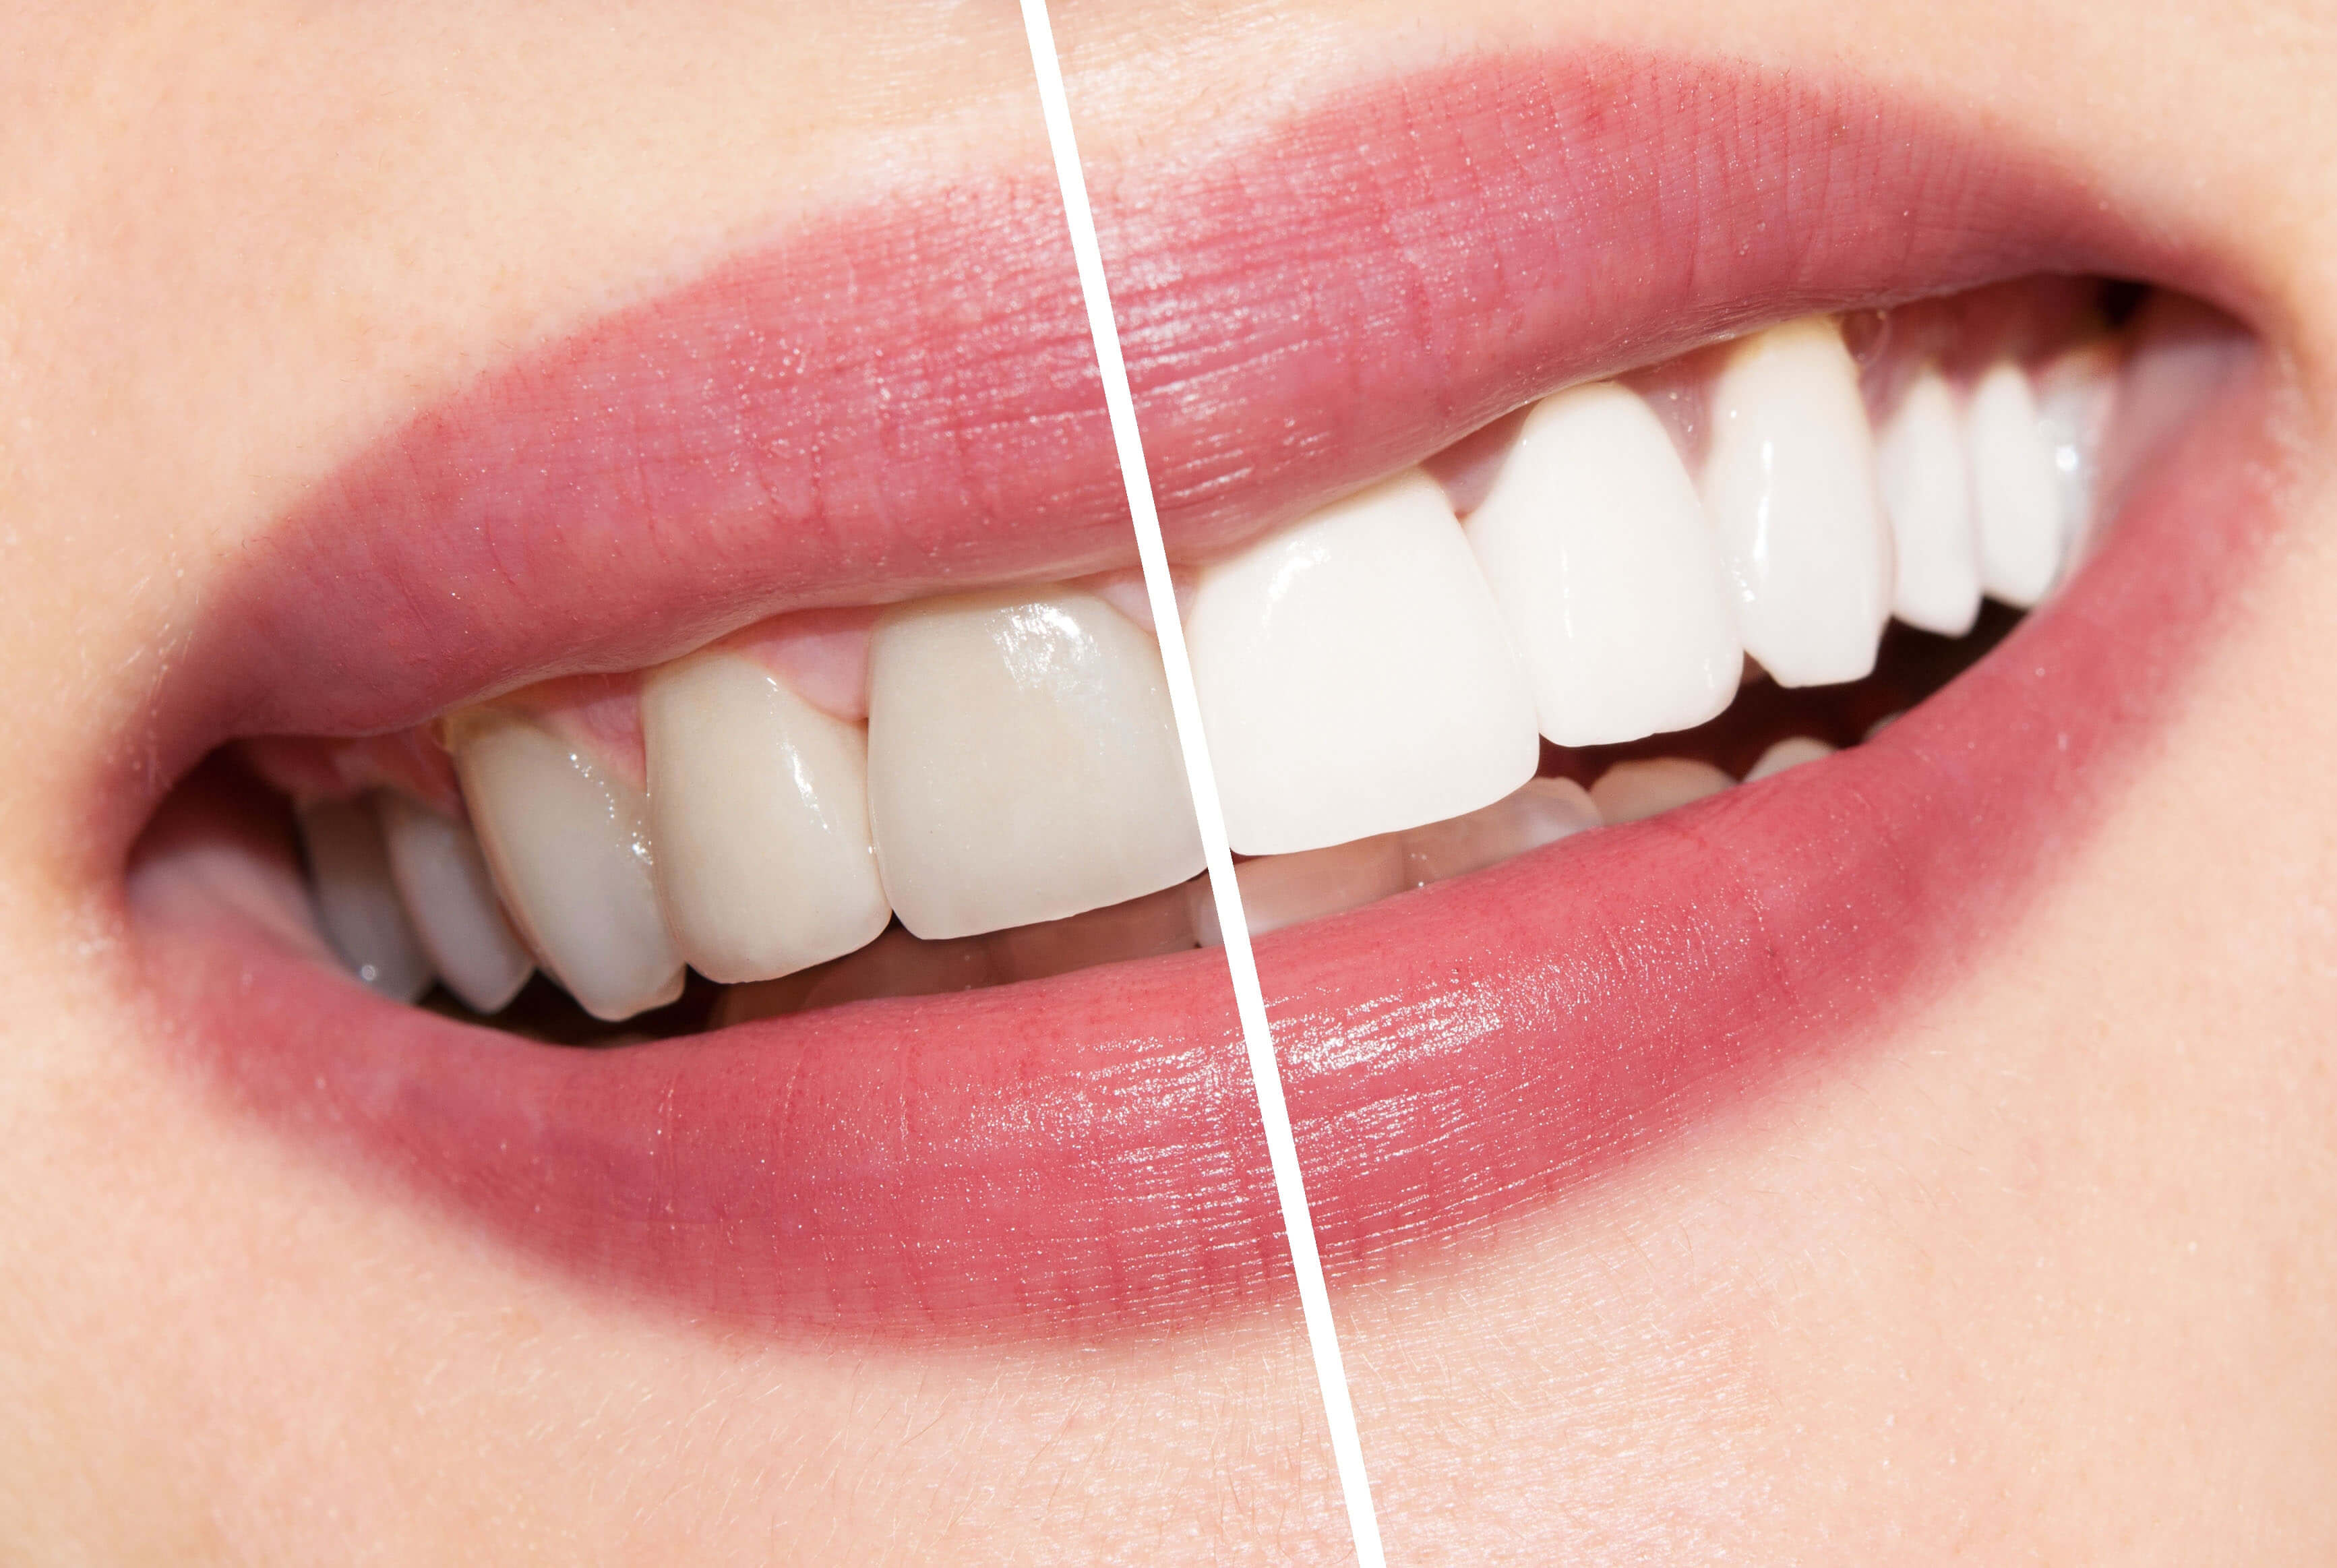 Teeth Whitening Costs and Information - The Dental Guide